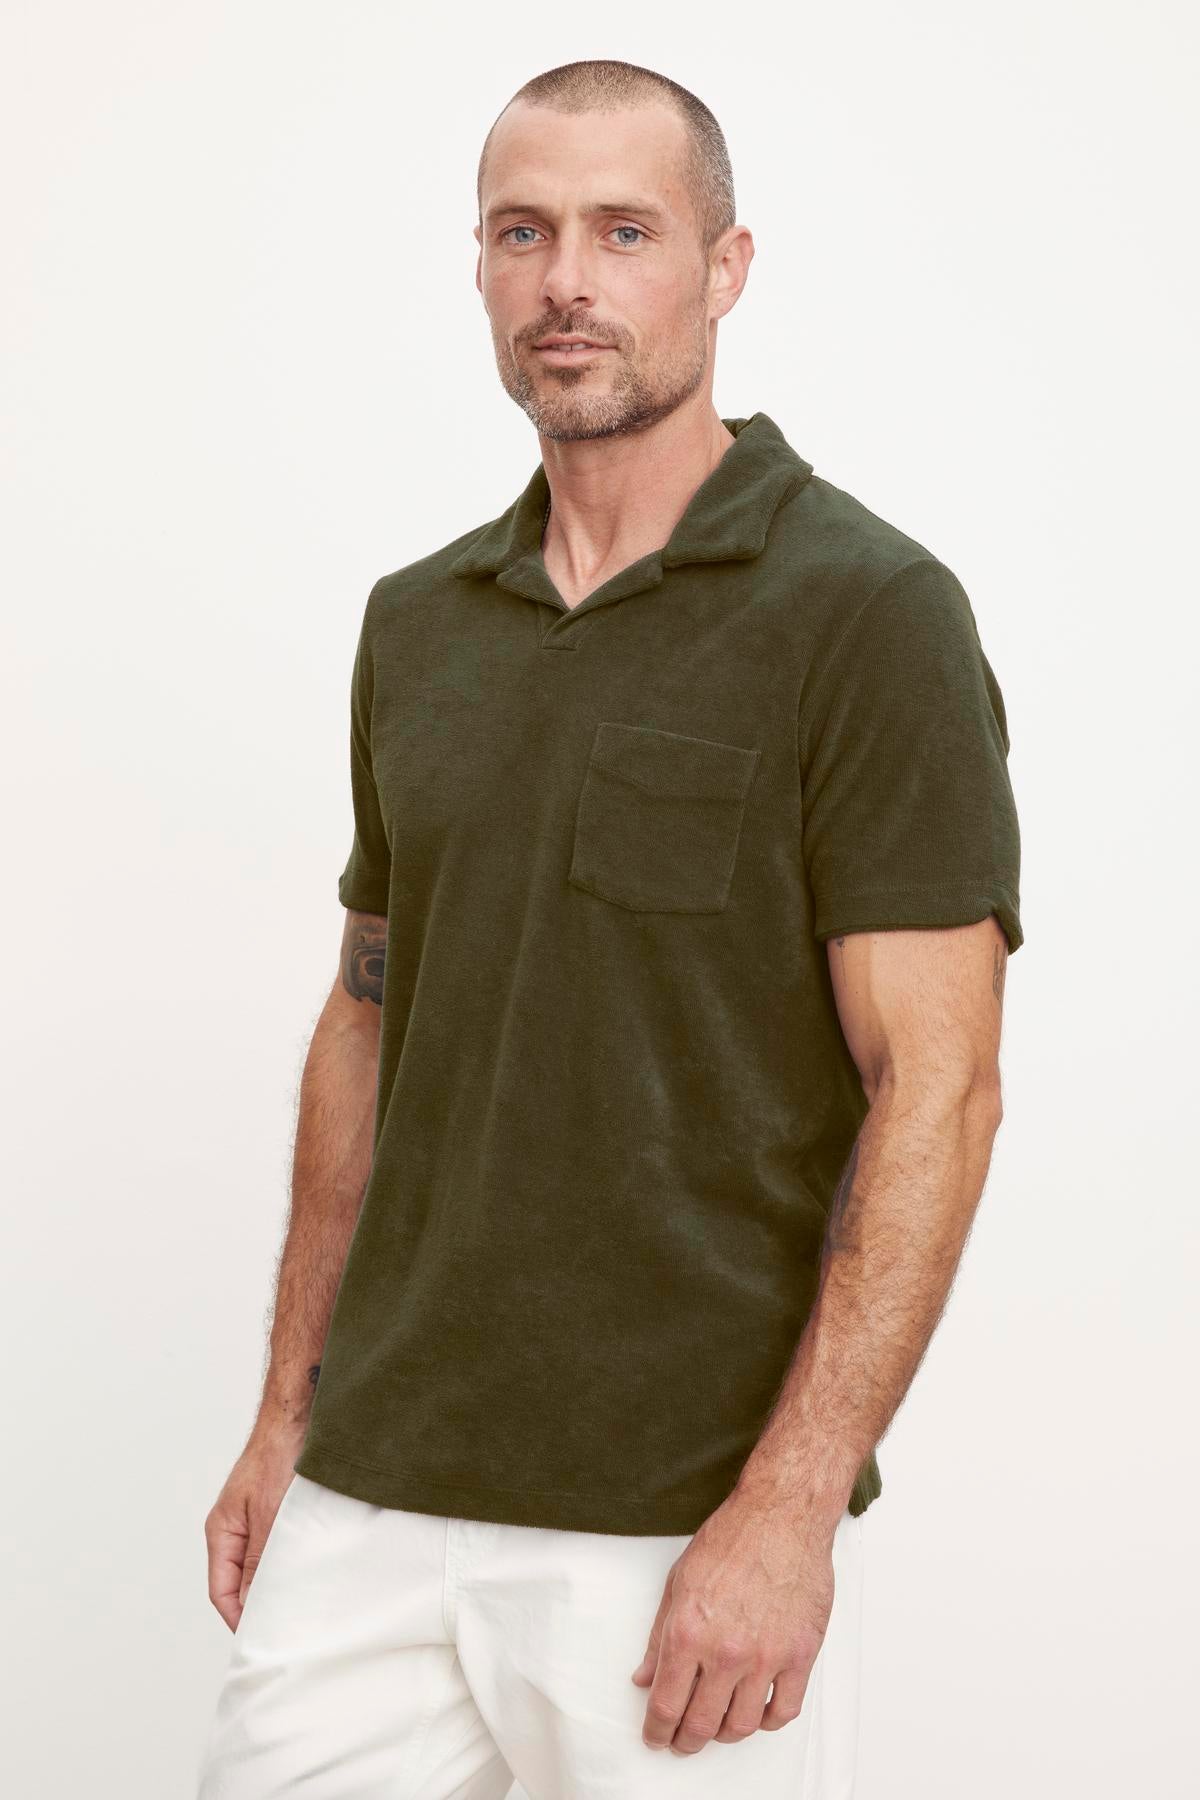 A man with a beard, wearing a dark green Sergey Polo shirt by Velvet by Graham & Spencer and white pants, standing against a plain background.-36890717880513